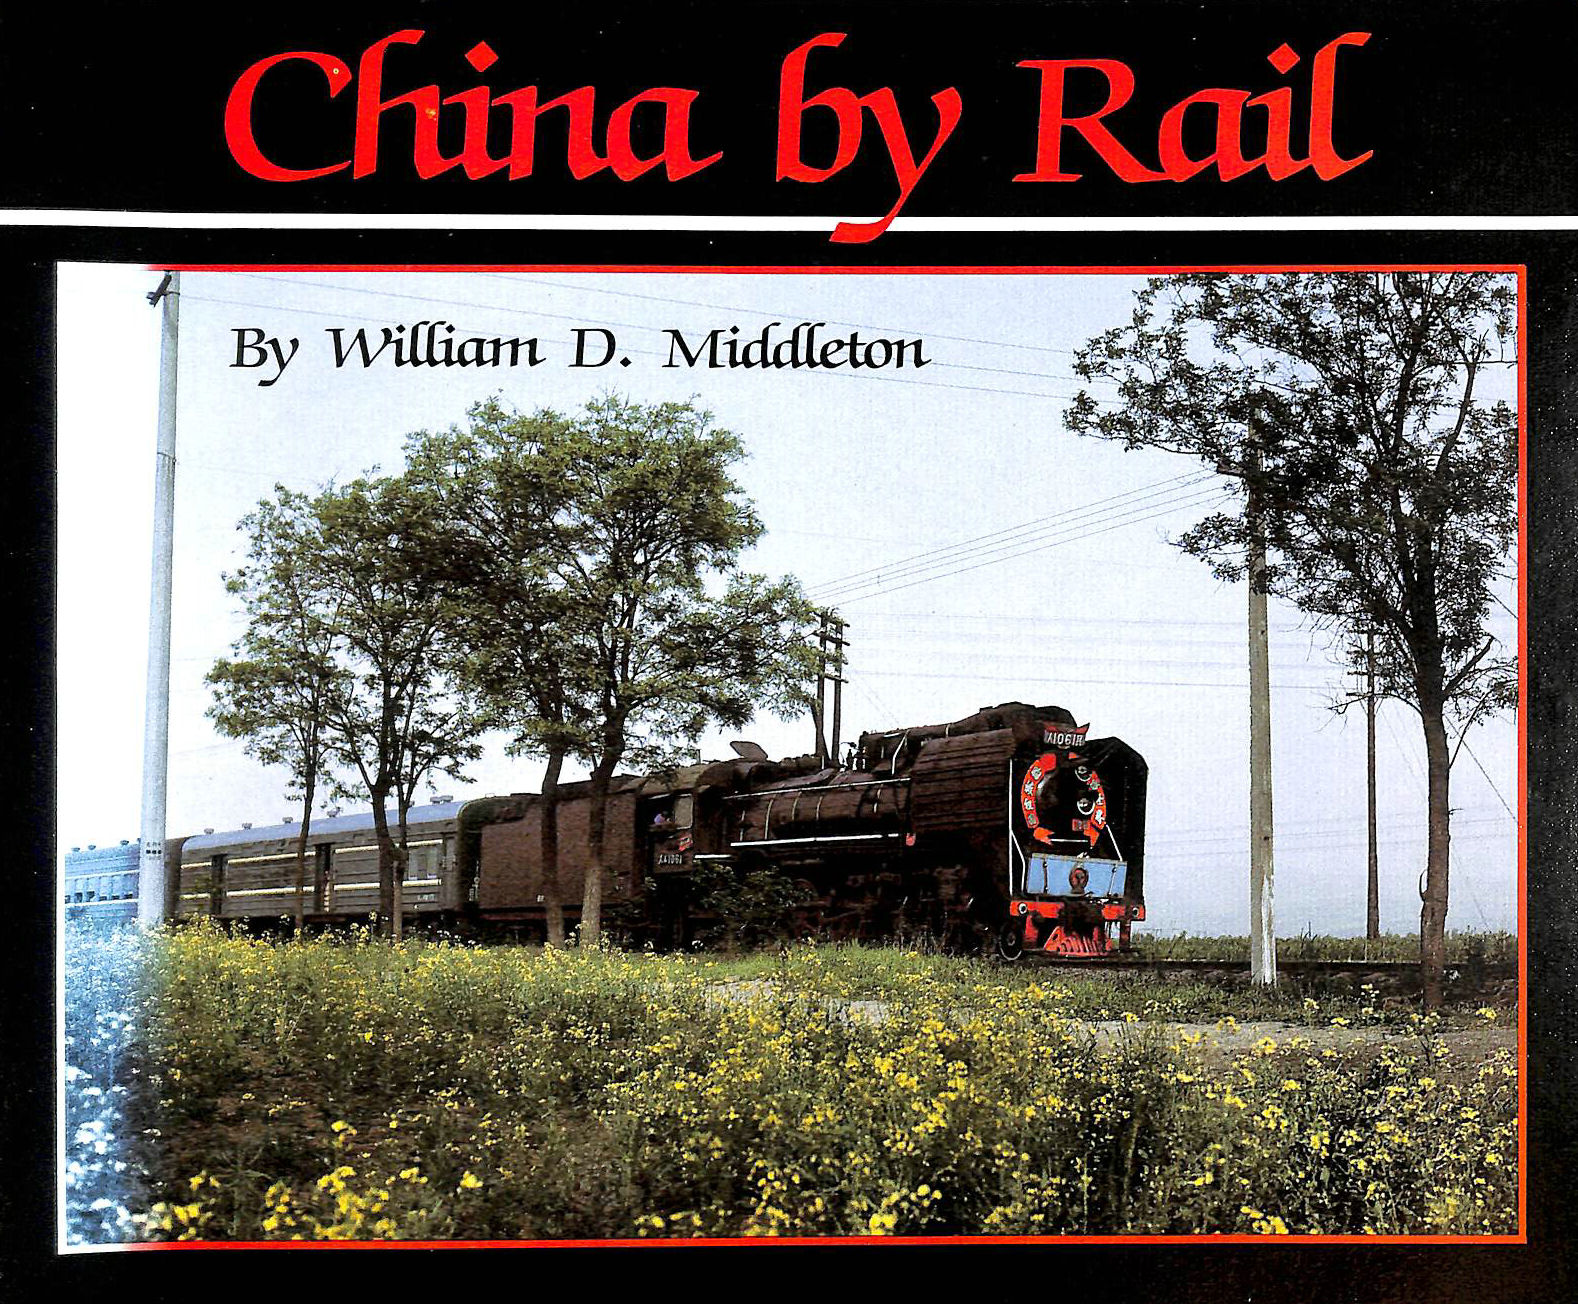 WILLIAM D MIDDLETON - Title: China by rail